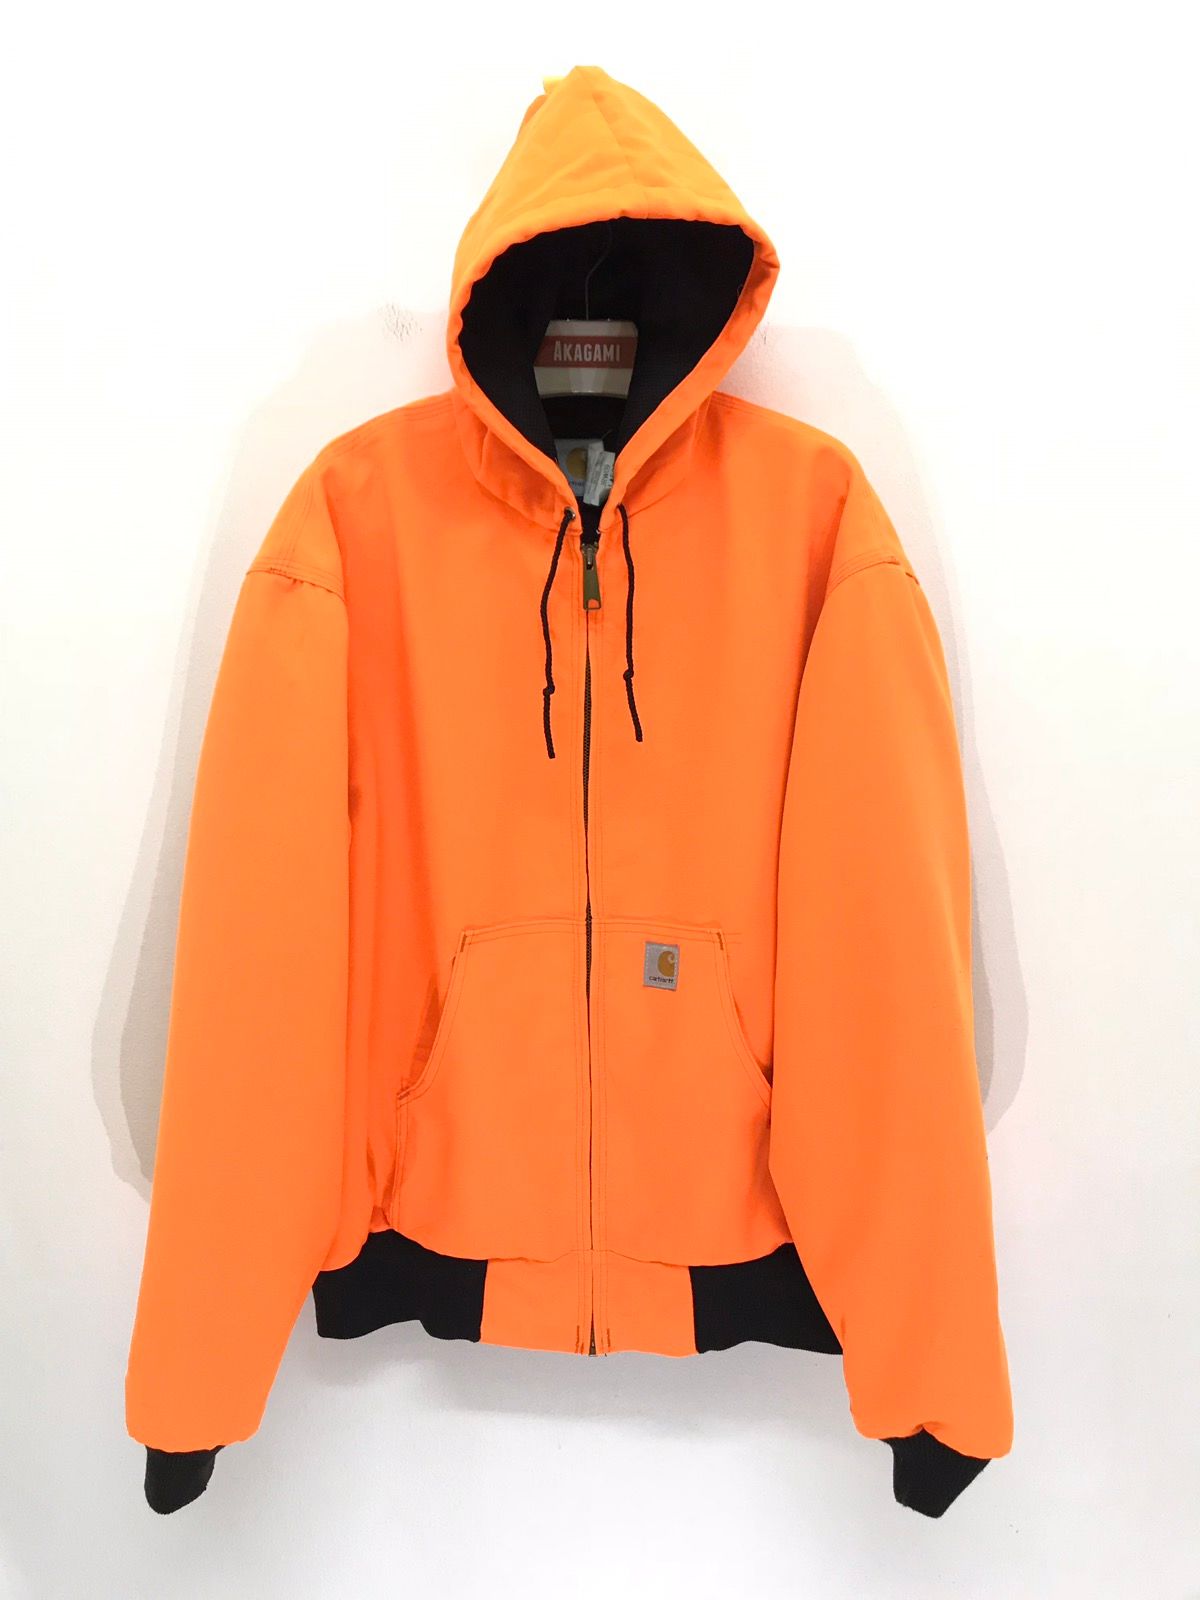 Carhartt Made in USA Carhartt Jacket Neon Orange Very Bright Colour Size US XL / EU 56 / 4 - 1 Preview